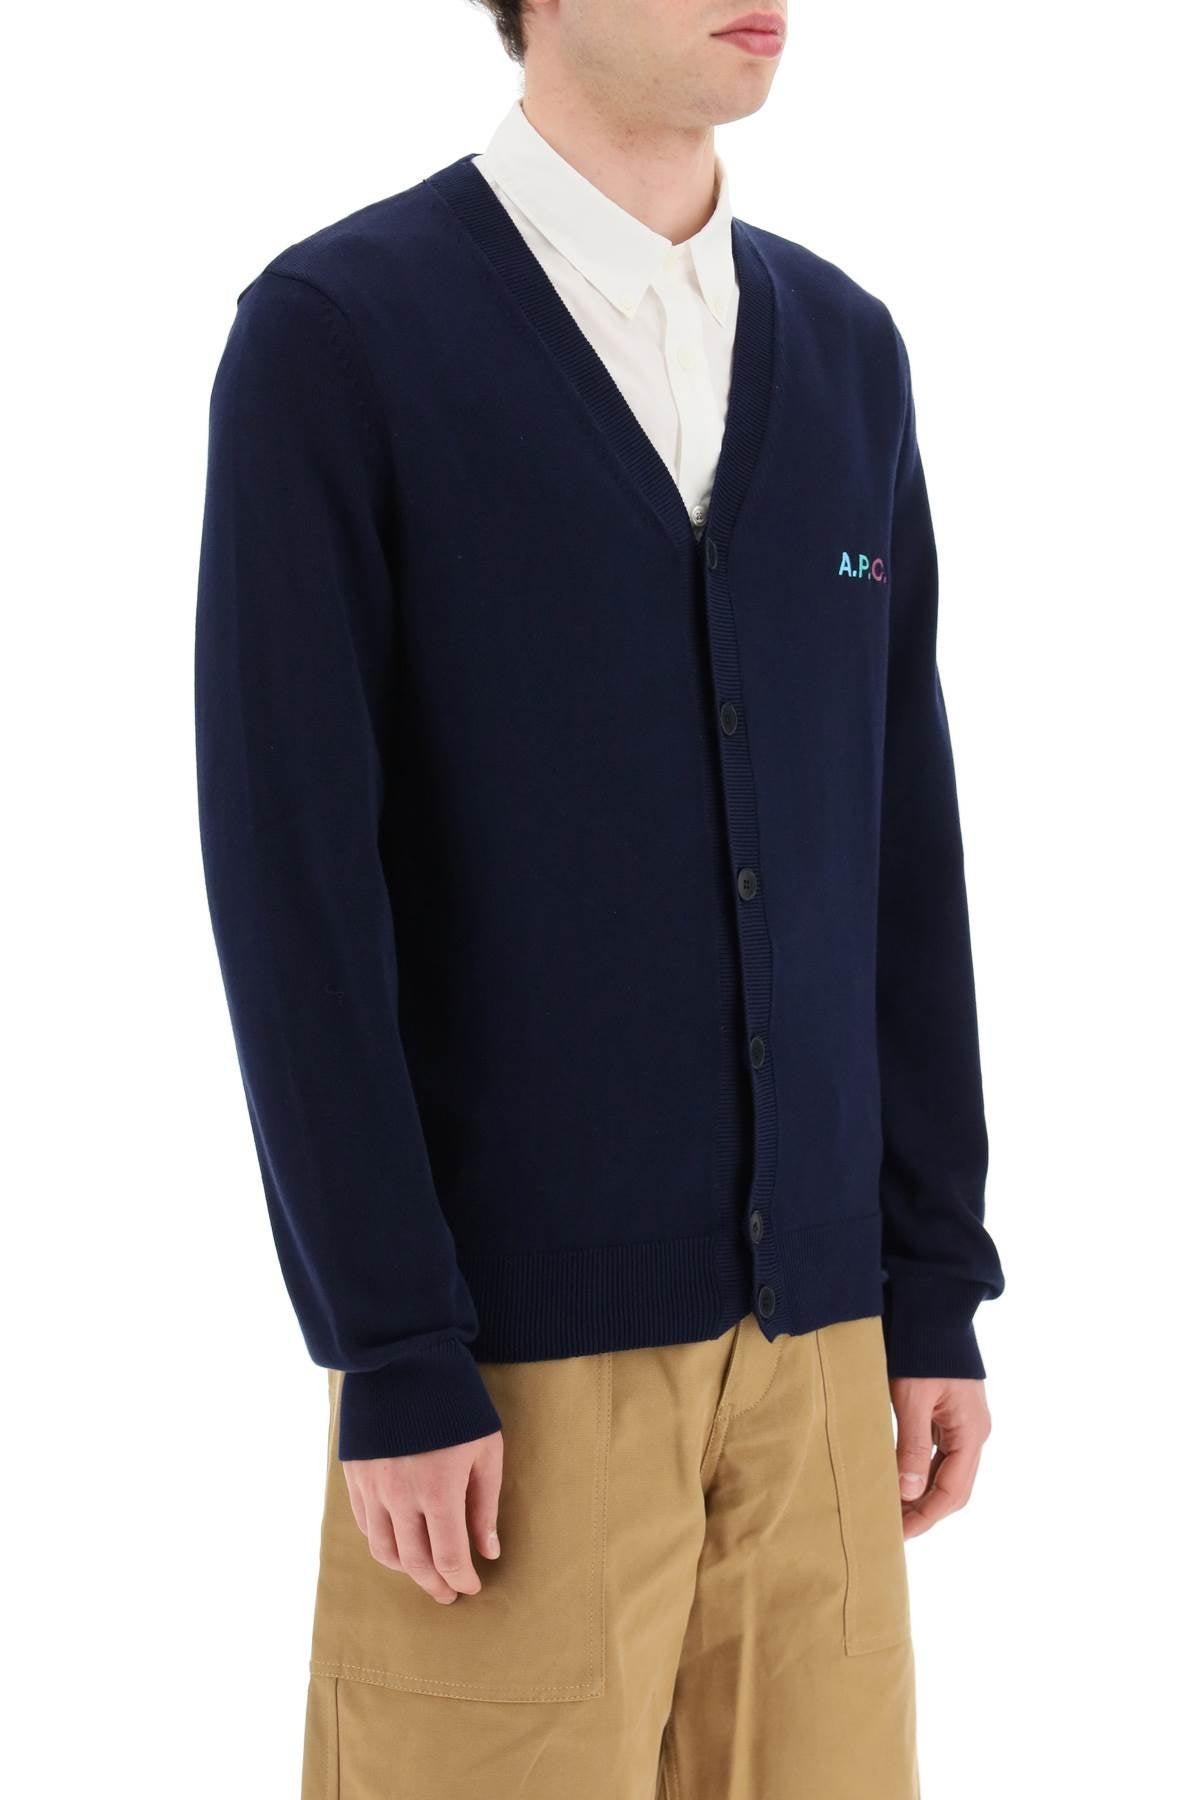 A.P.C. Joseph Cardigan With Embroidered Logo Detail in Blue for Men | Lyst